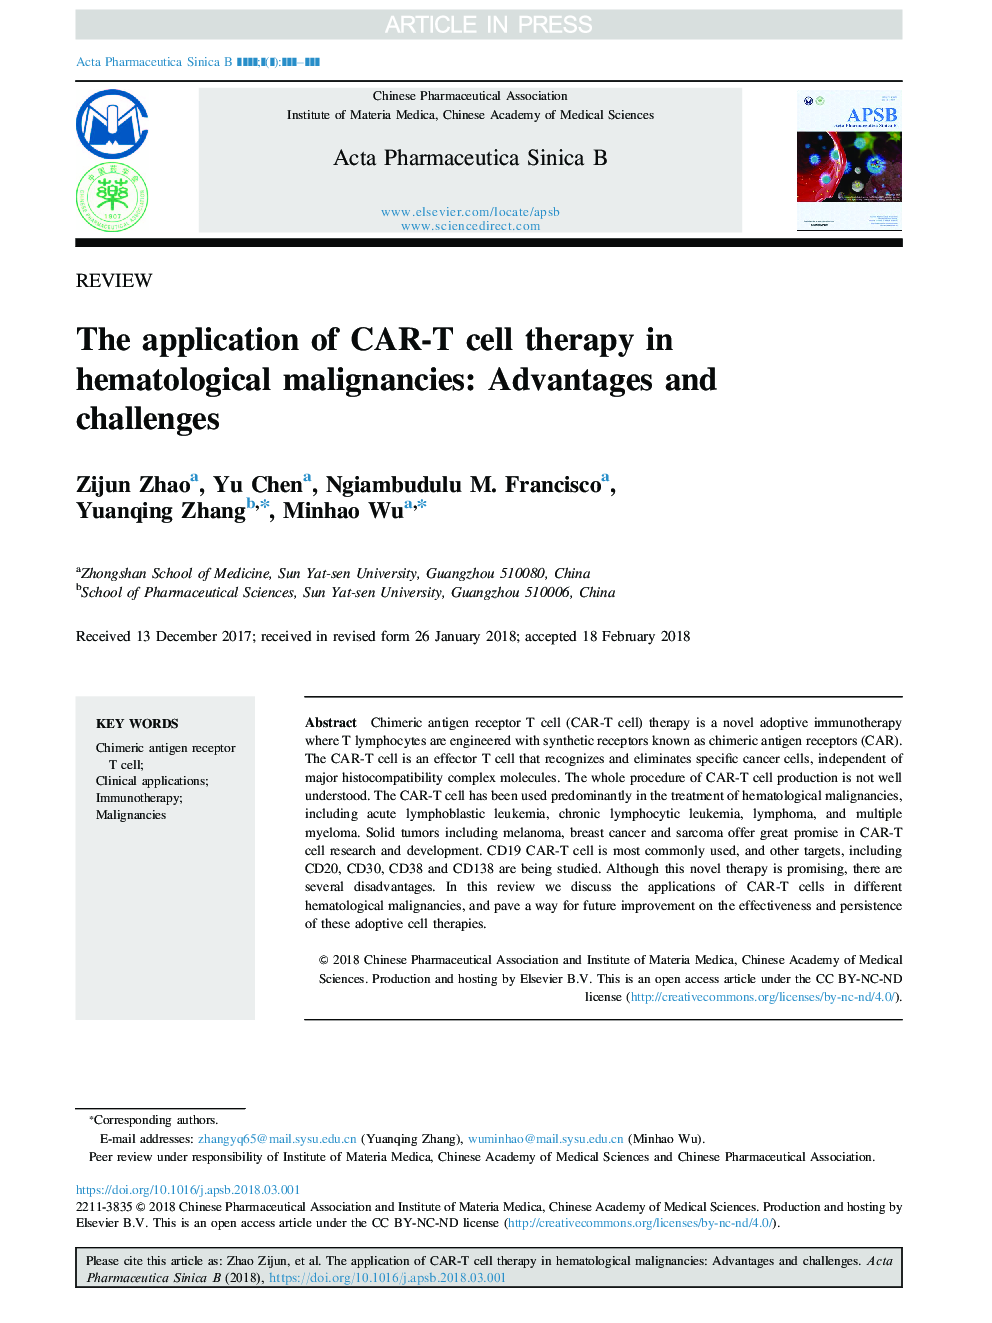 The application of CAR-T cell therapy in hematological malignancies: advantages and challenges